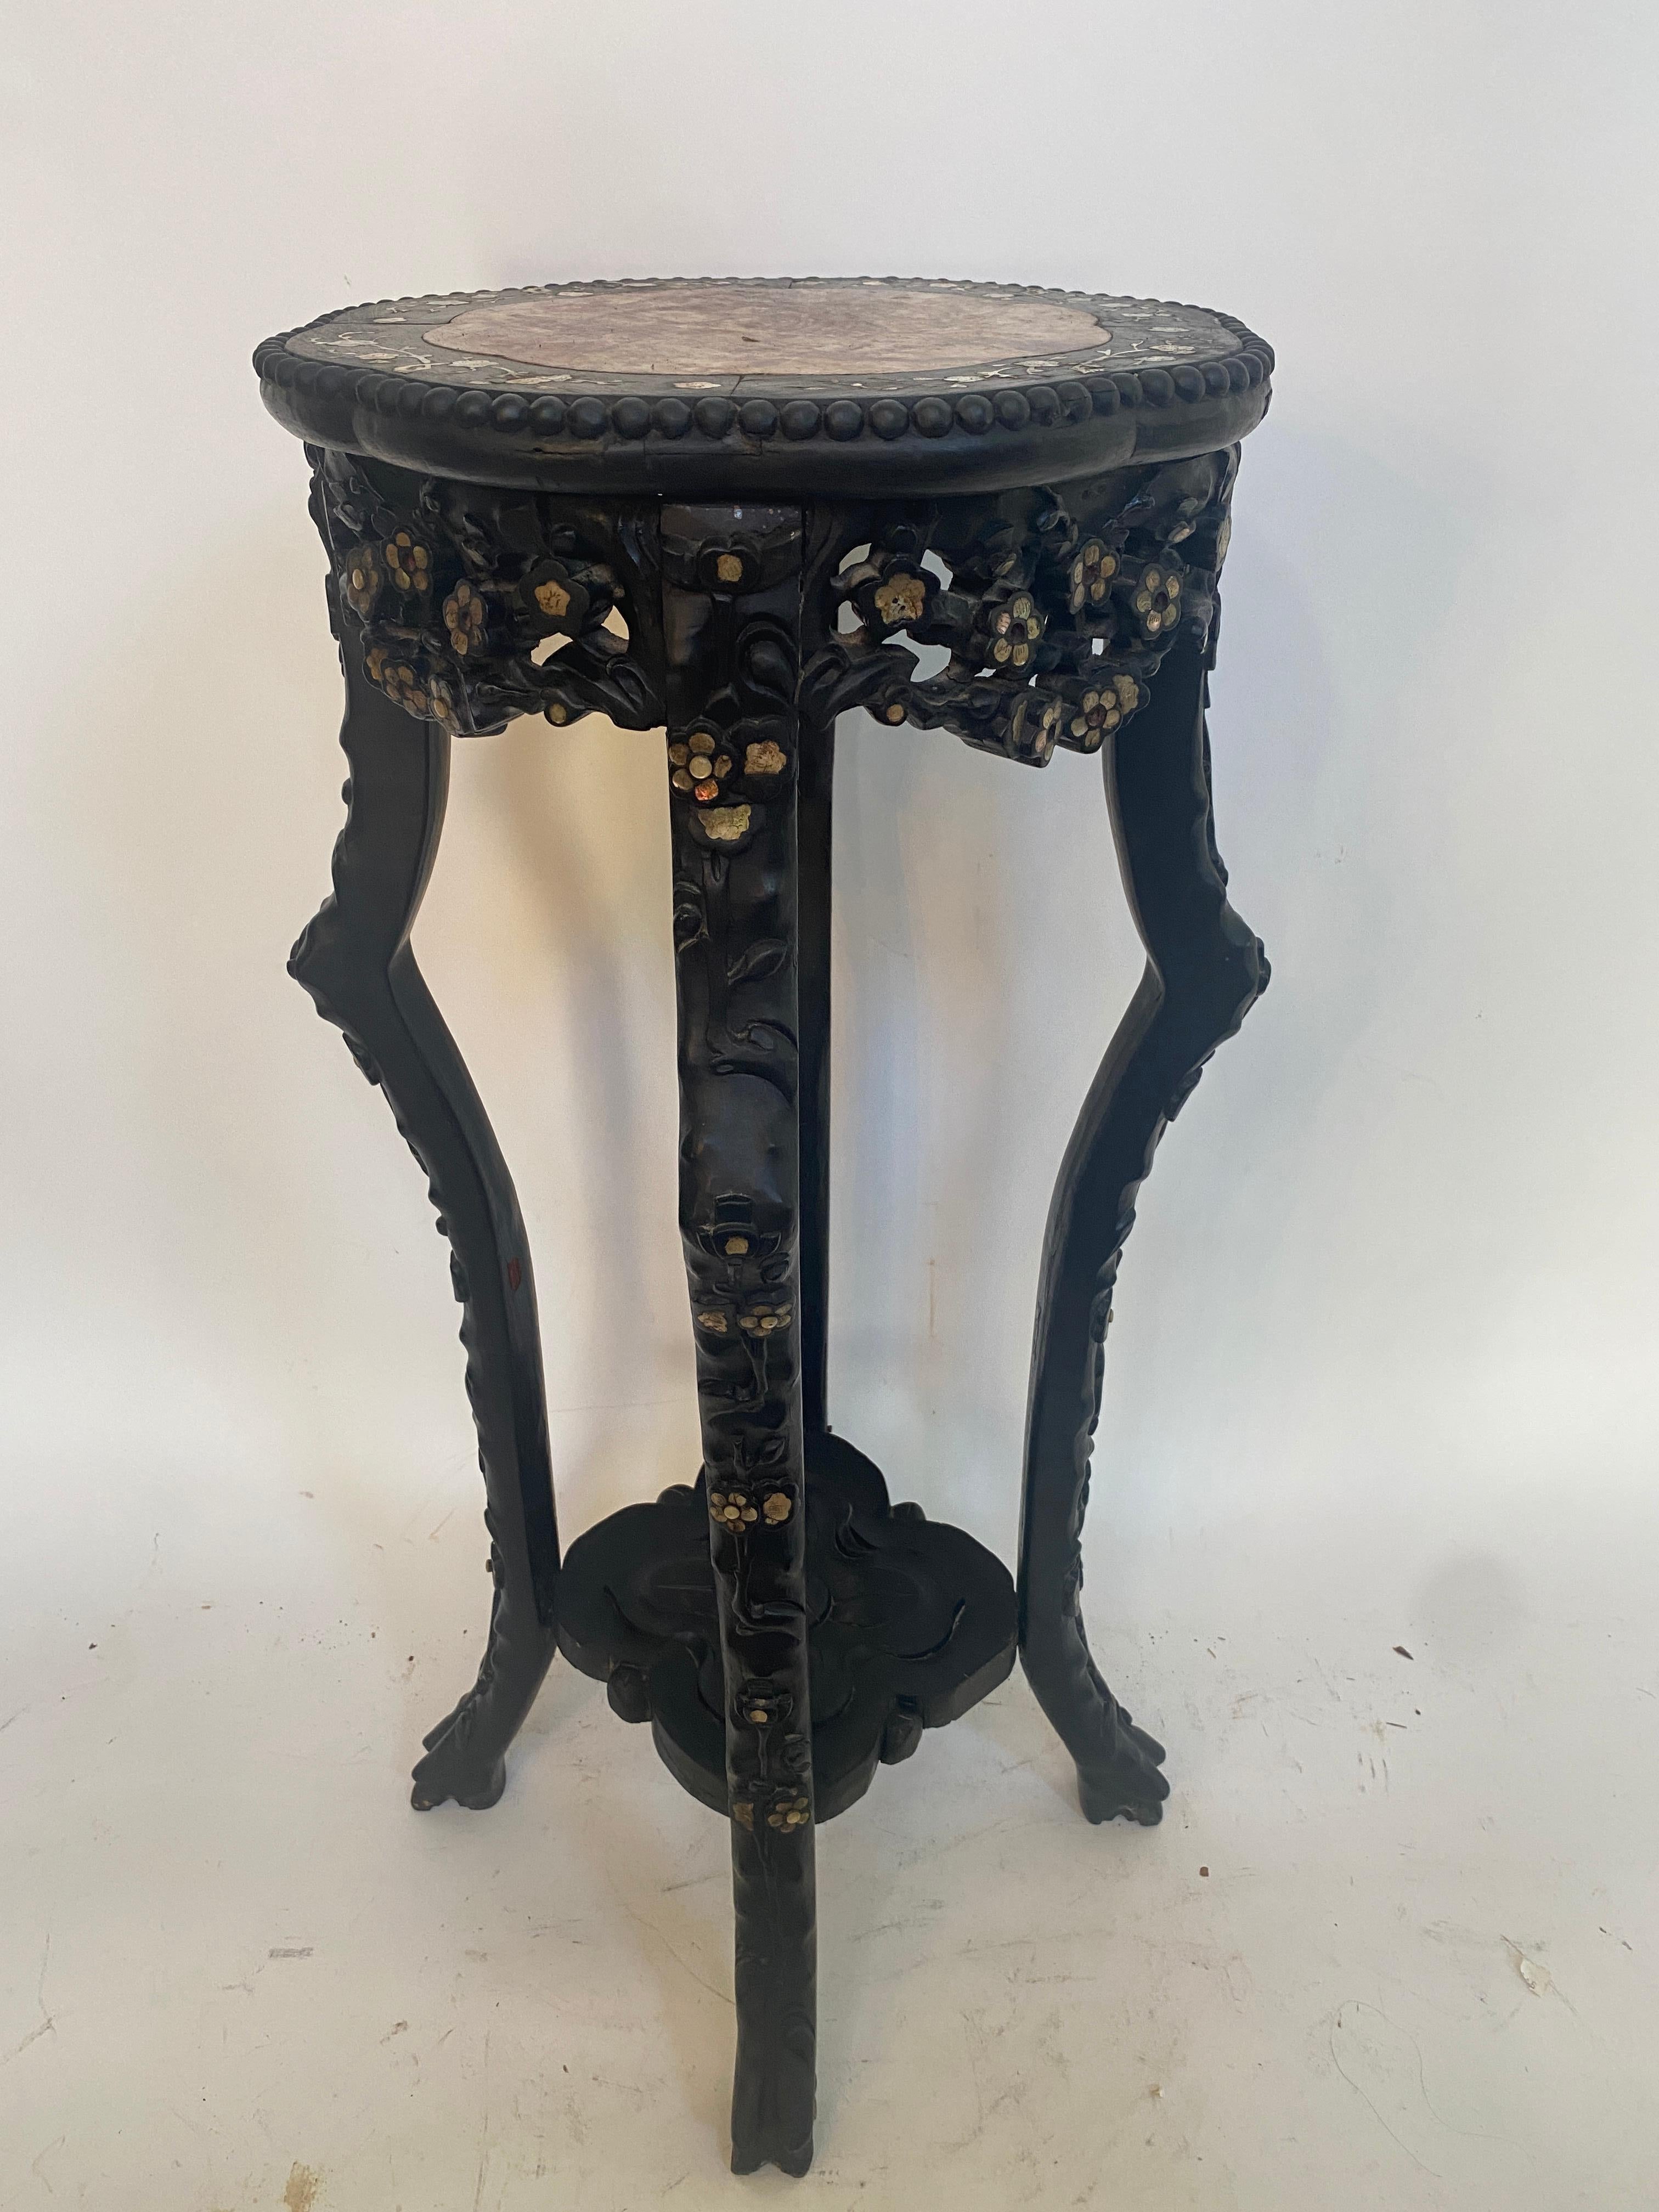 A 19th century antique Chinese heavily carved hardwood circular stand table with rouge marble top insert, the inset marble top over carved hardwood apron with mother of pear inlay plum blossom design and unique 4 legs, see more pictures, measures: